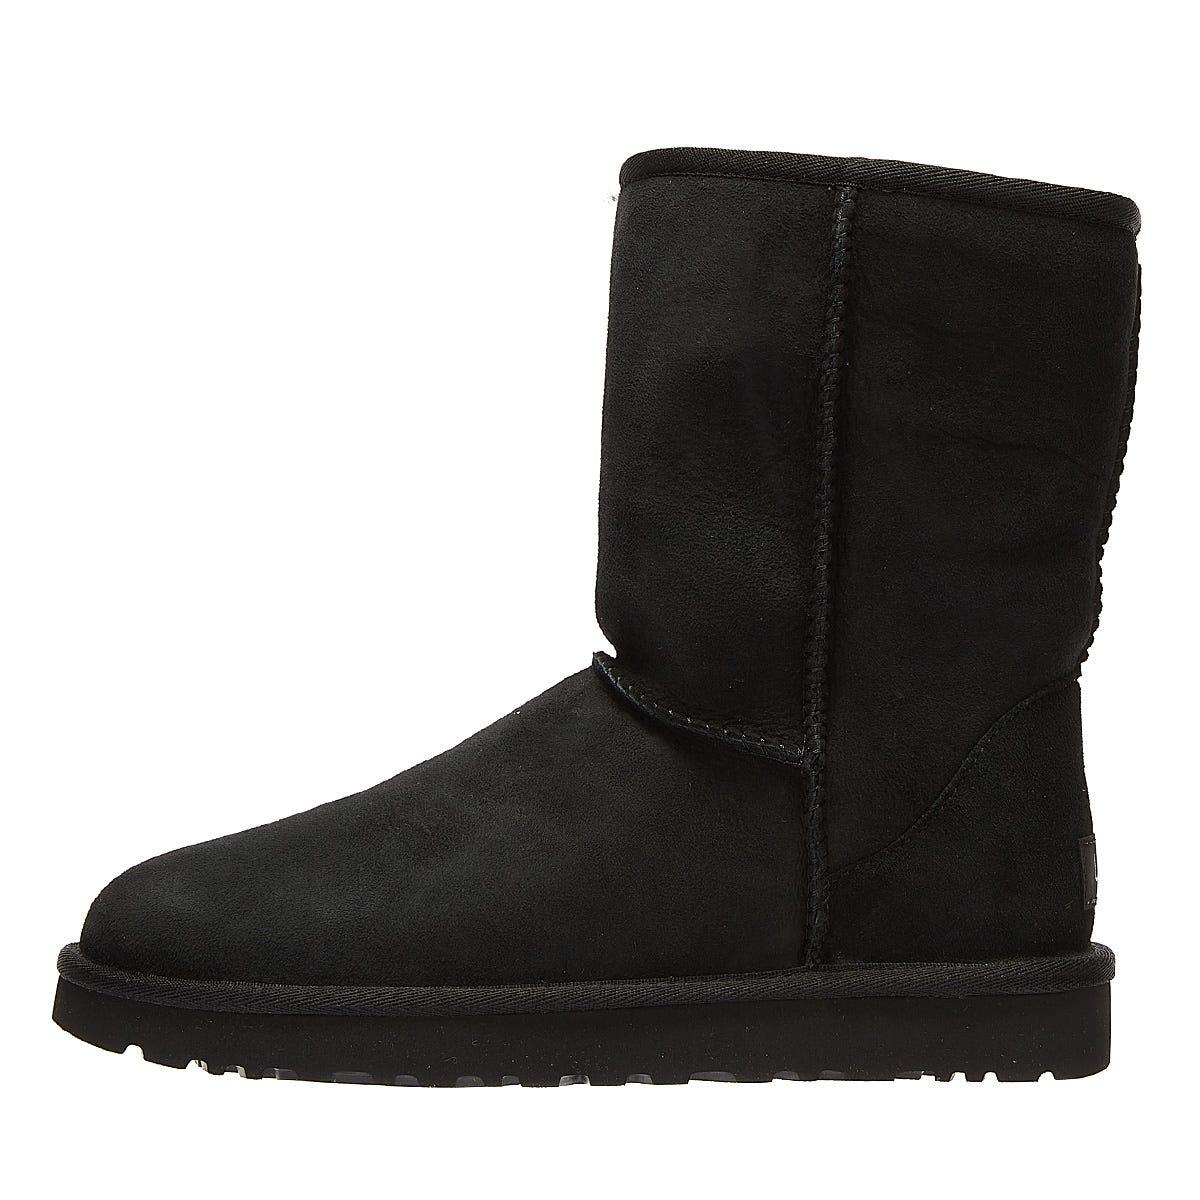 ugg classic uggpure faux shearling lined clog